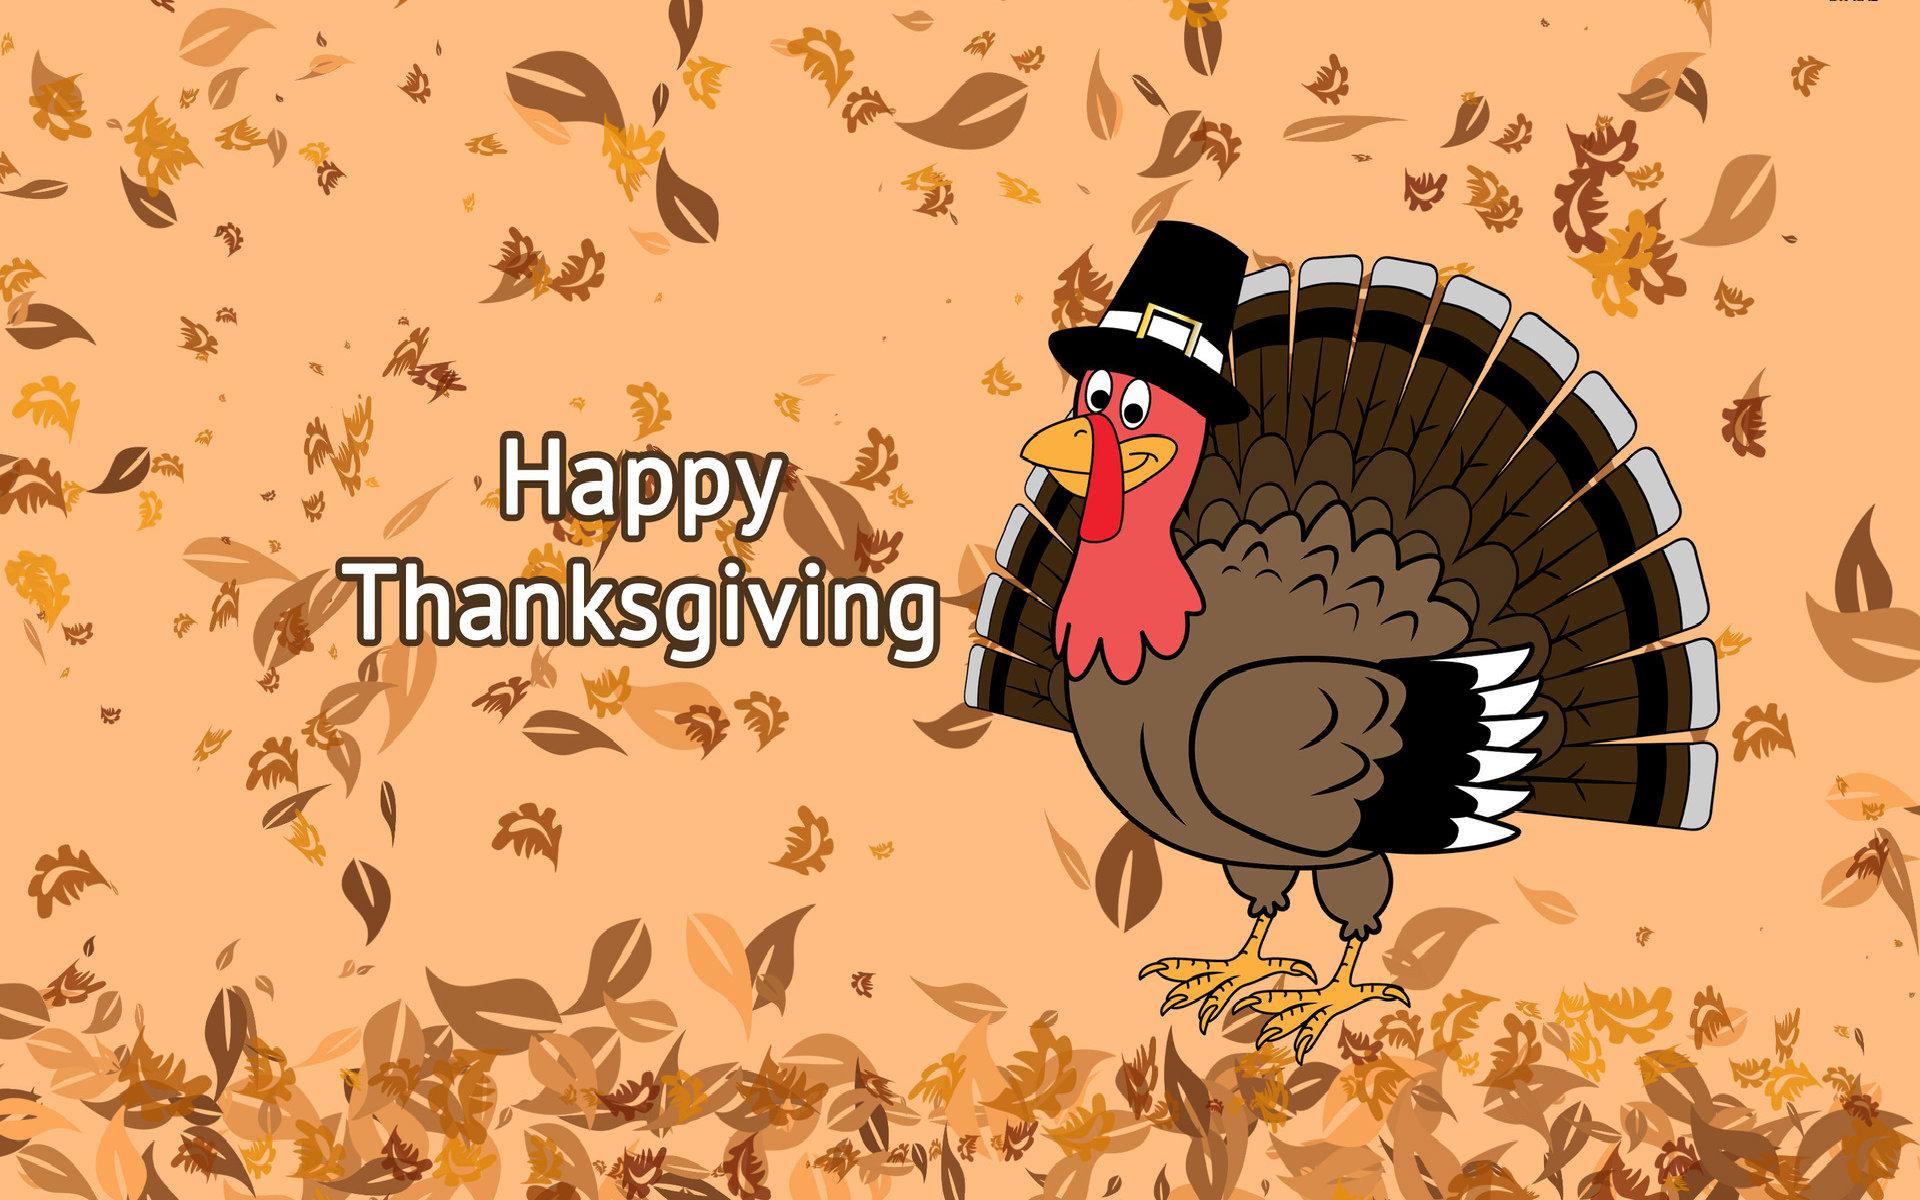 Find more Happy thanksgiving wallpaper. 